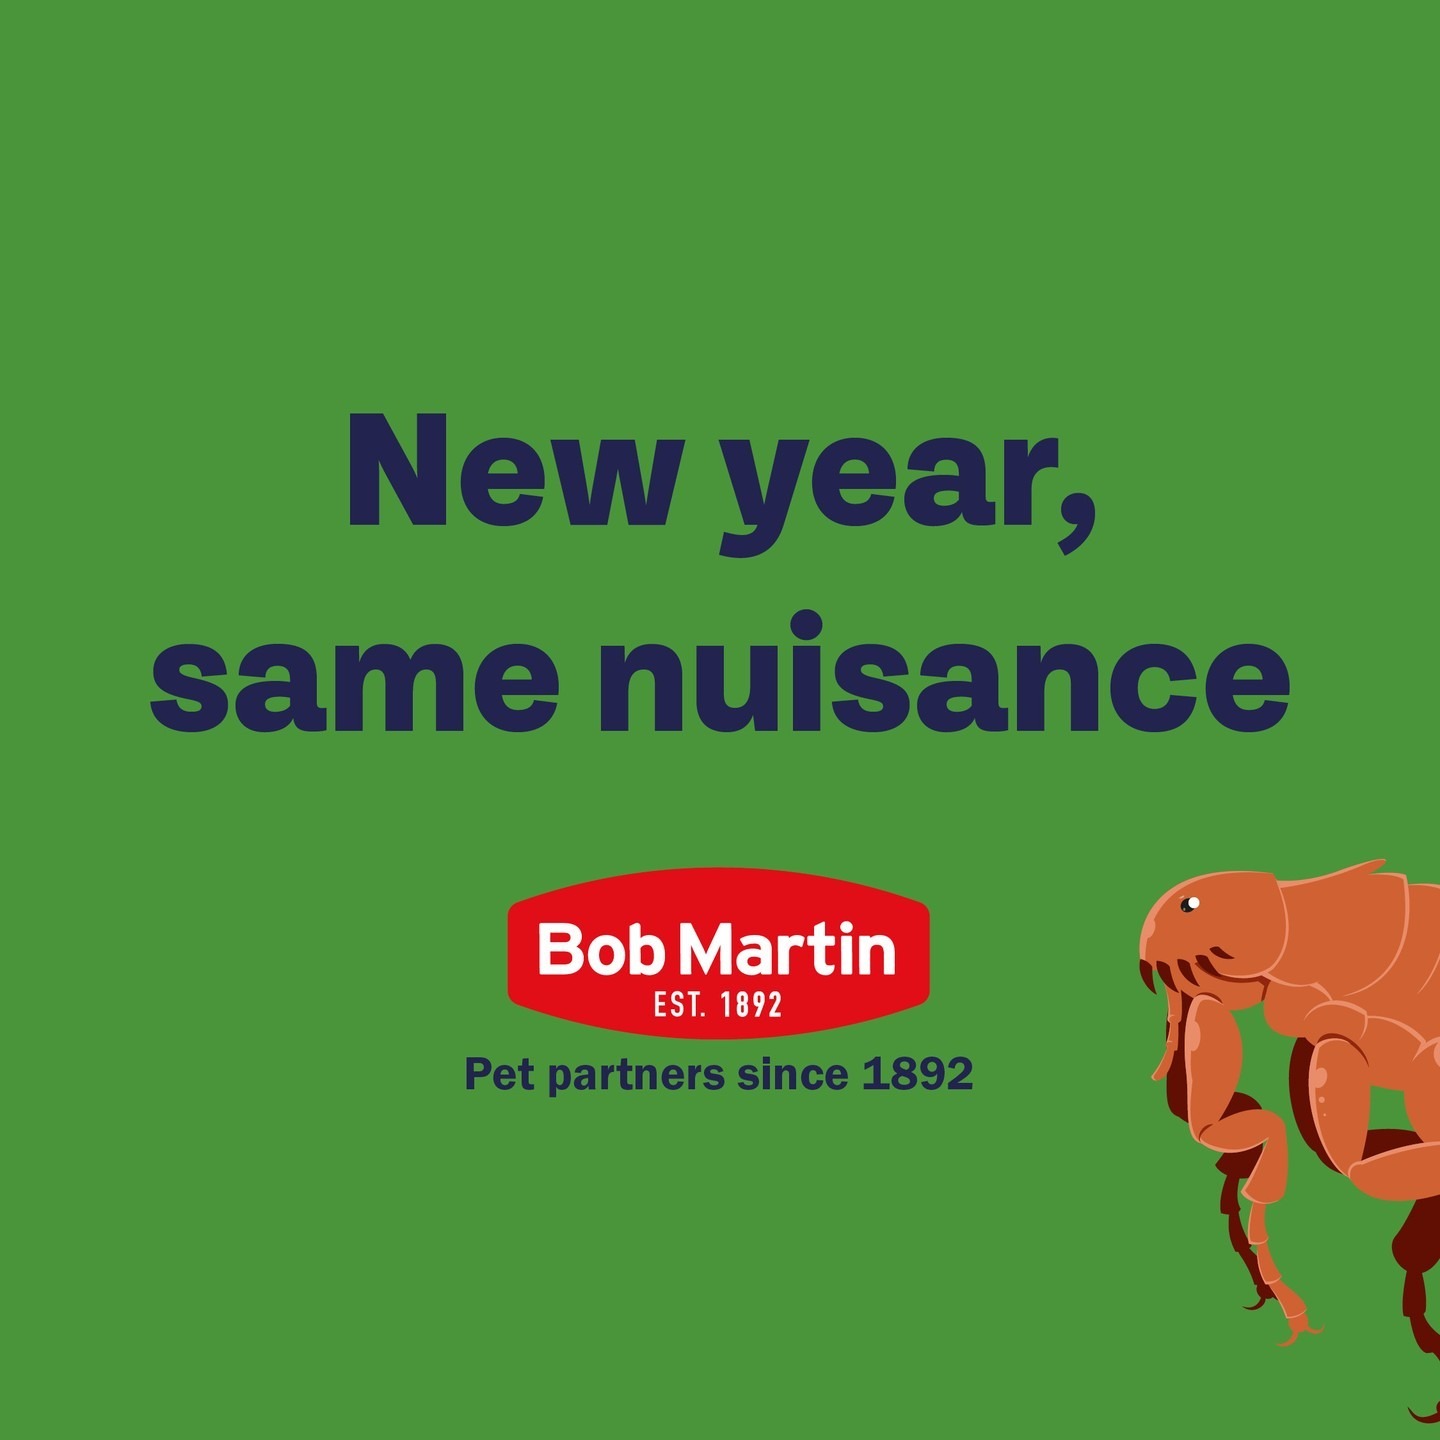 You don’t want pesky parasites following you into 2022! Shop Bob Martin today to ensure your pet stays flea, tick and worm free all year round 🐾

.
.
.
 #BobMartin #PetHealthcare #Flea #Worm #Dog #Cat #SpotOn #Pets #PetsOfInstagram #PetCare #PetTips #PetHealth #HealthyPets #ActivePets